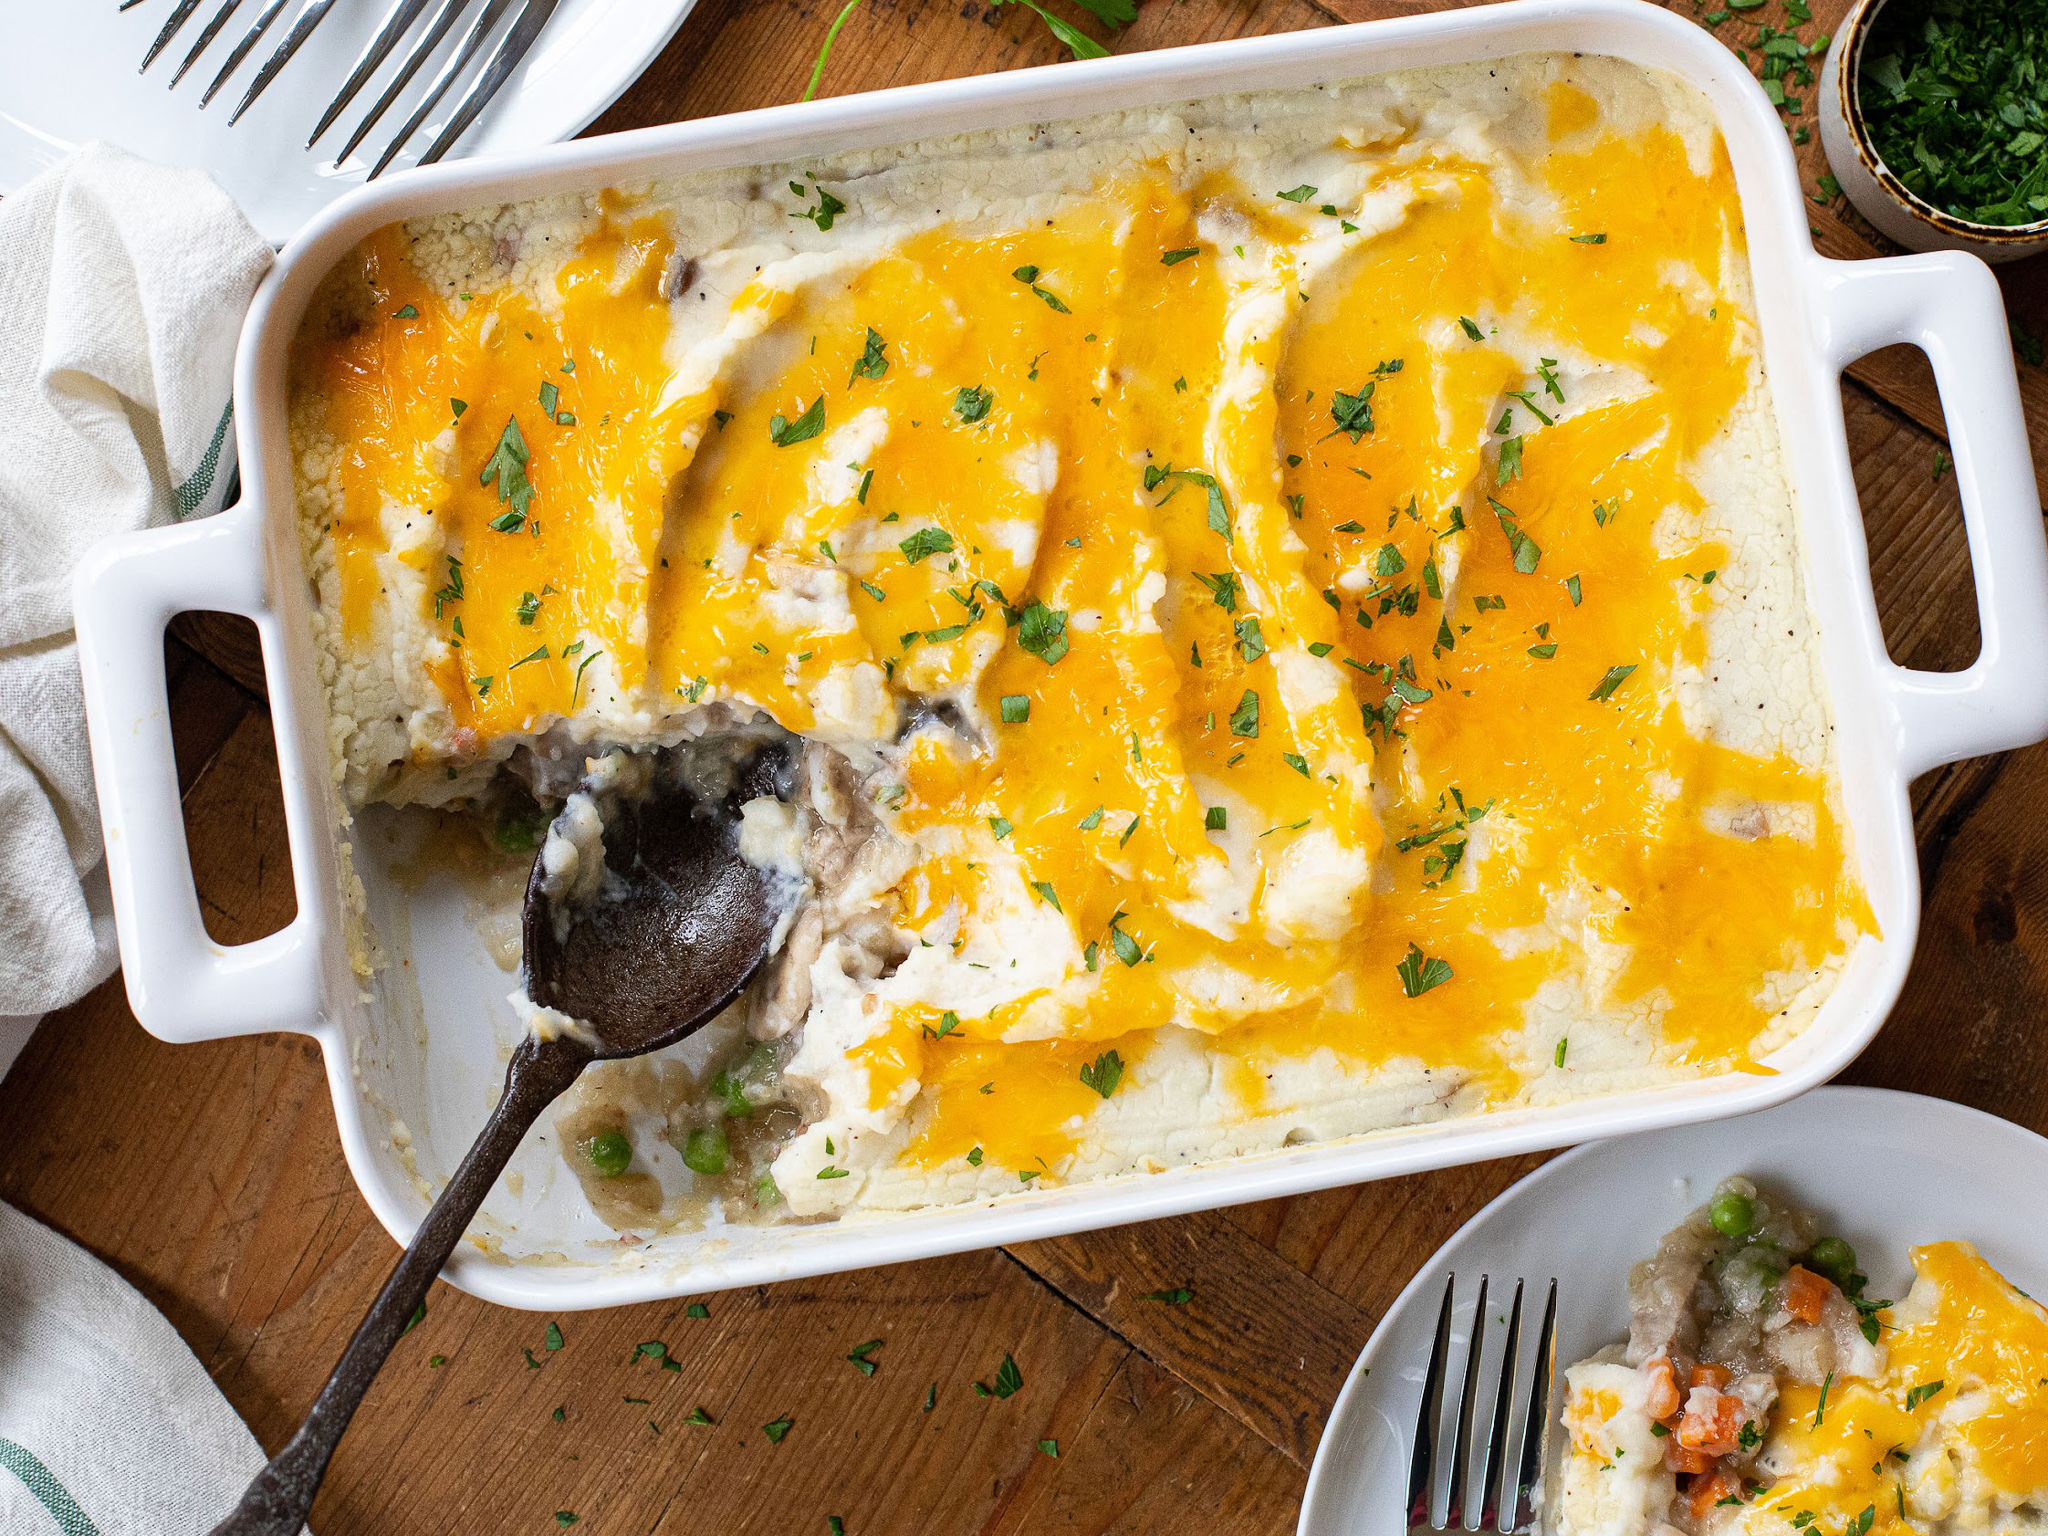 Try Tuscan Pork Shepherd’s Pie - Perfect Modern Holiday Meal on I Heart Publix